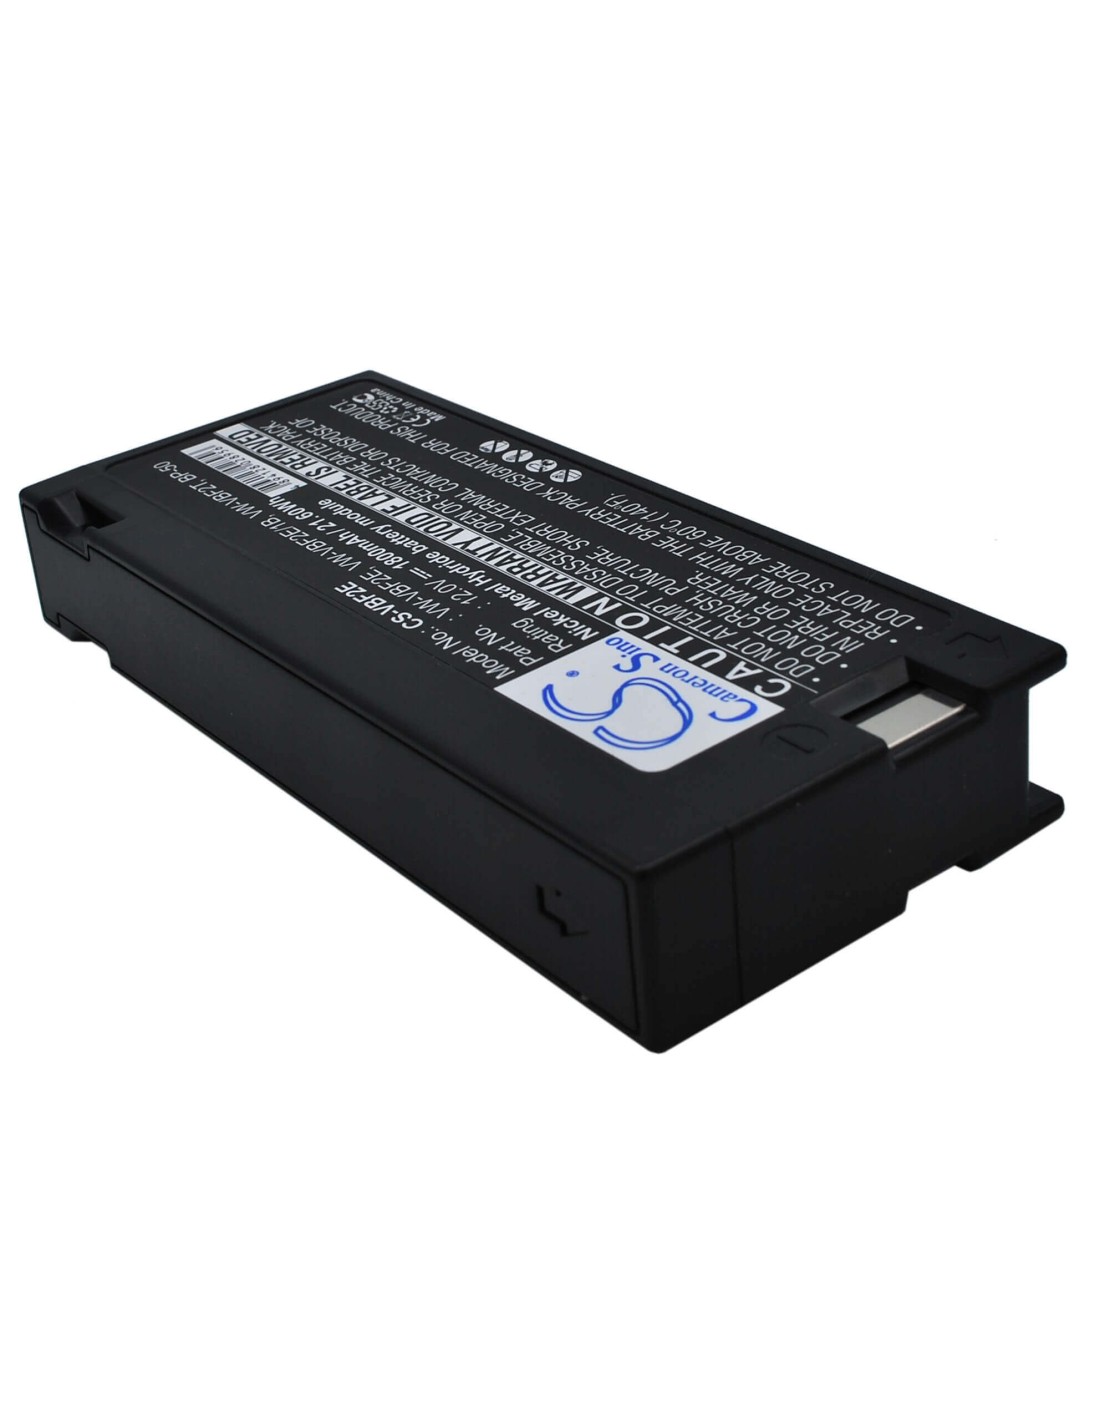 Battery for Bauer-bosch Vcc-516, Vcc-526, Vcc-550, Vrp-30, 12V, 1800mAh - 21.60Wh